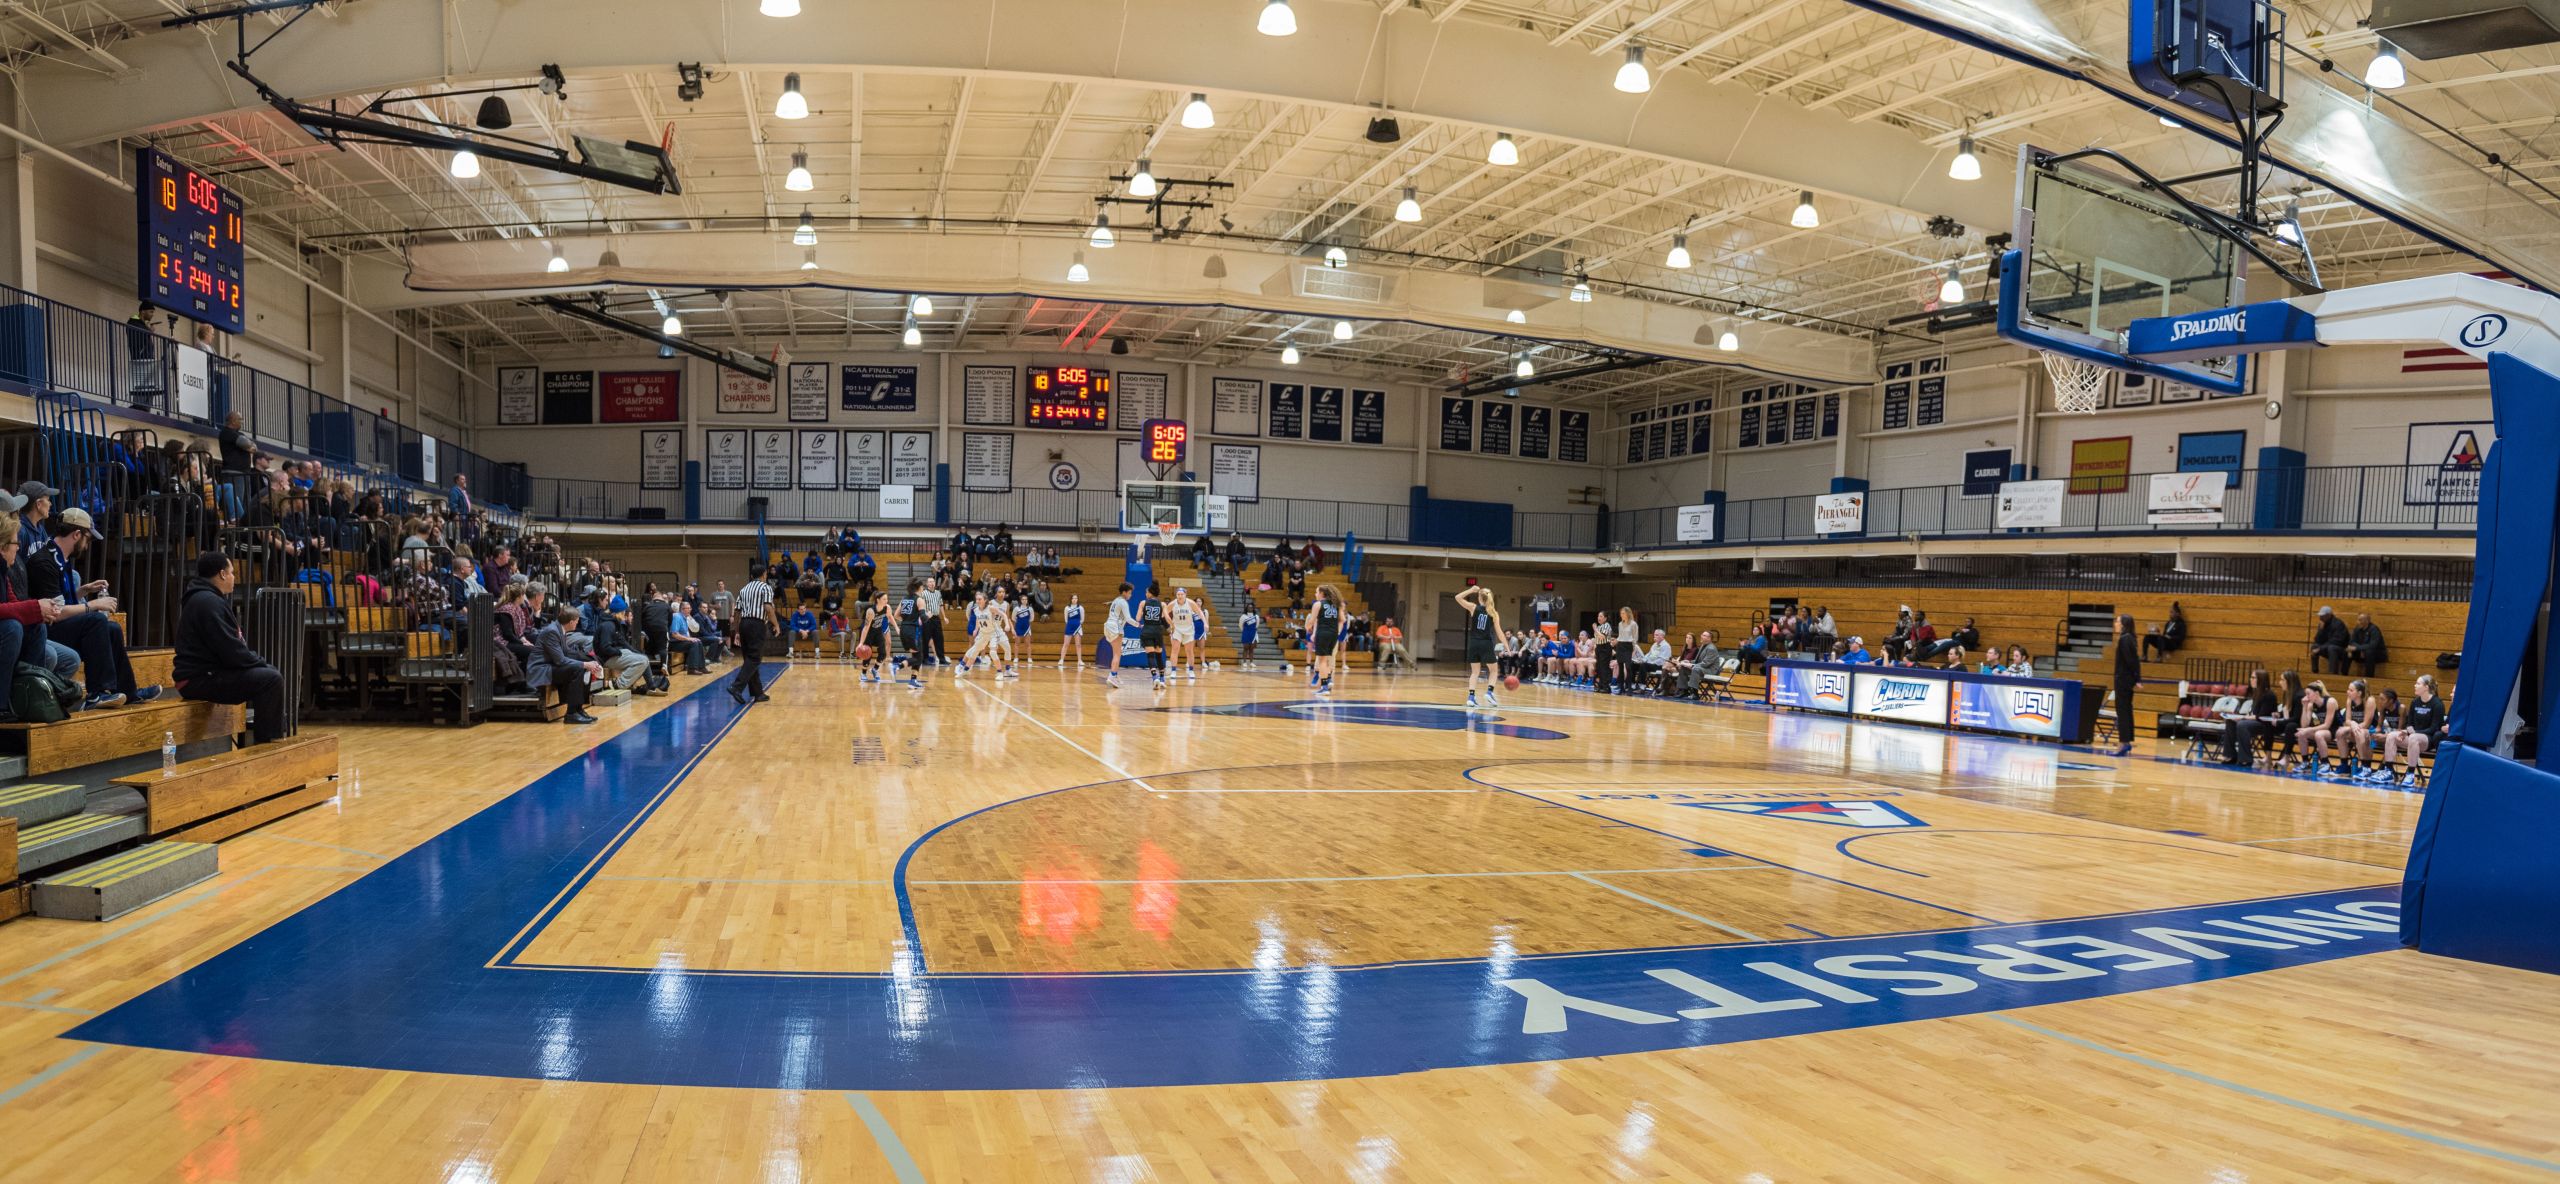 The Dixon Center gymnasium during a women's basketball game. Photo courtesy of the Cabrini marketing department.